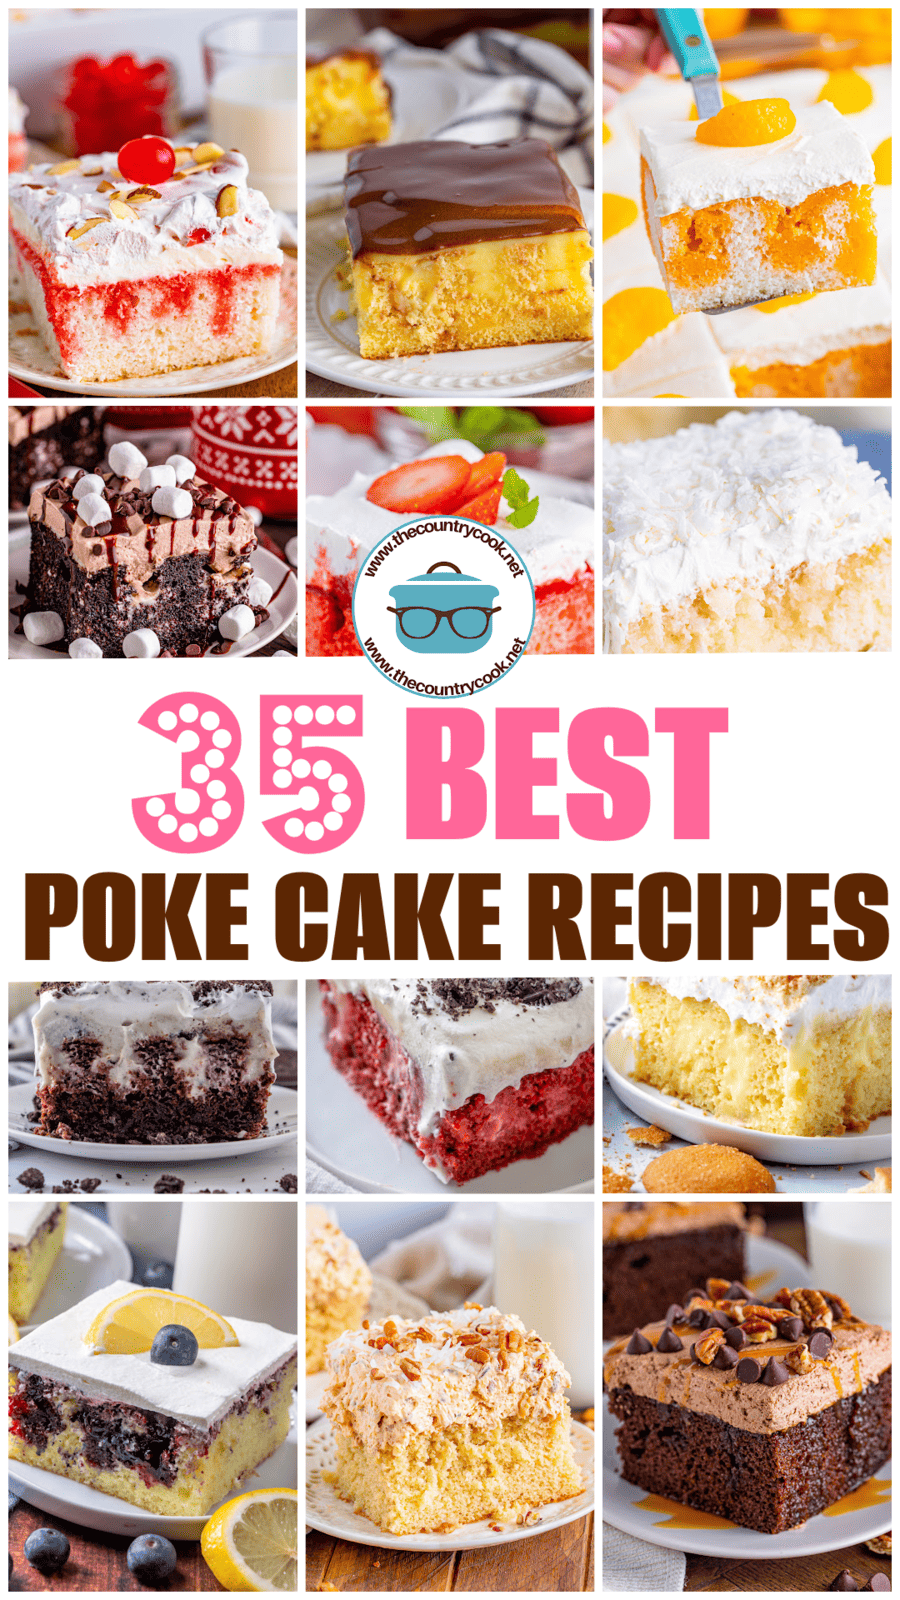 a collage of 12 photos of slices of poke cakes with text on the collage that reads "35 The Best Poke Cake Recipes". 